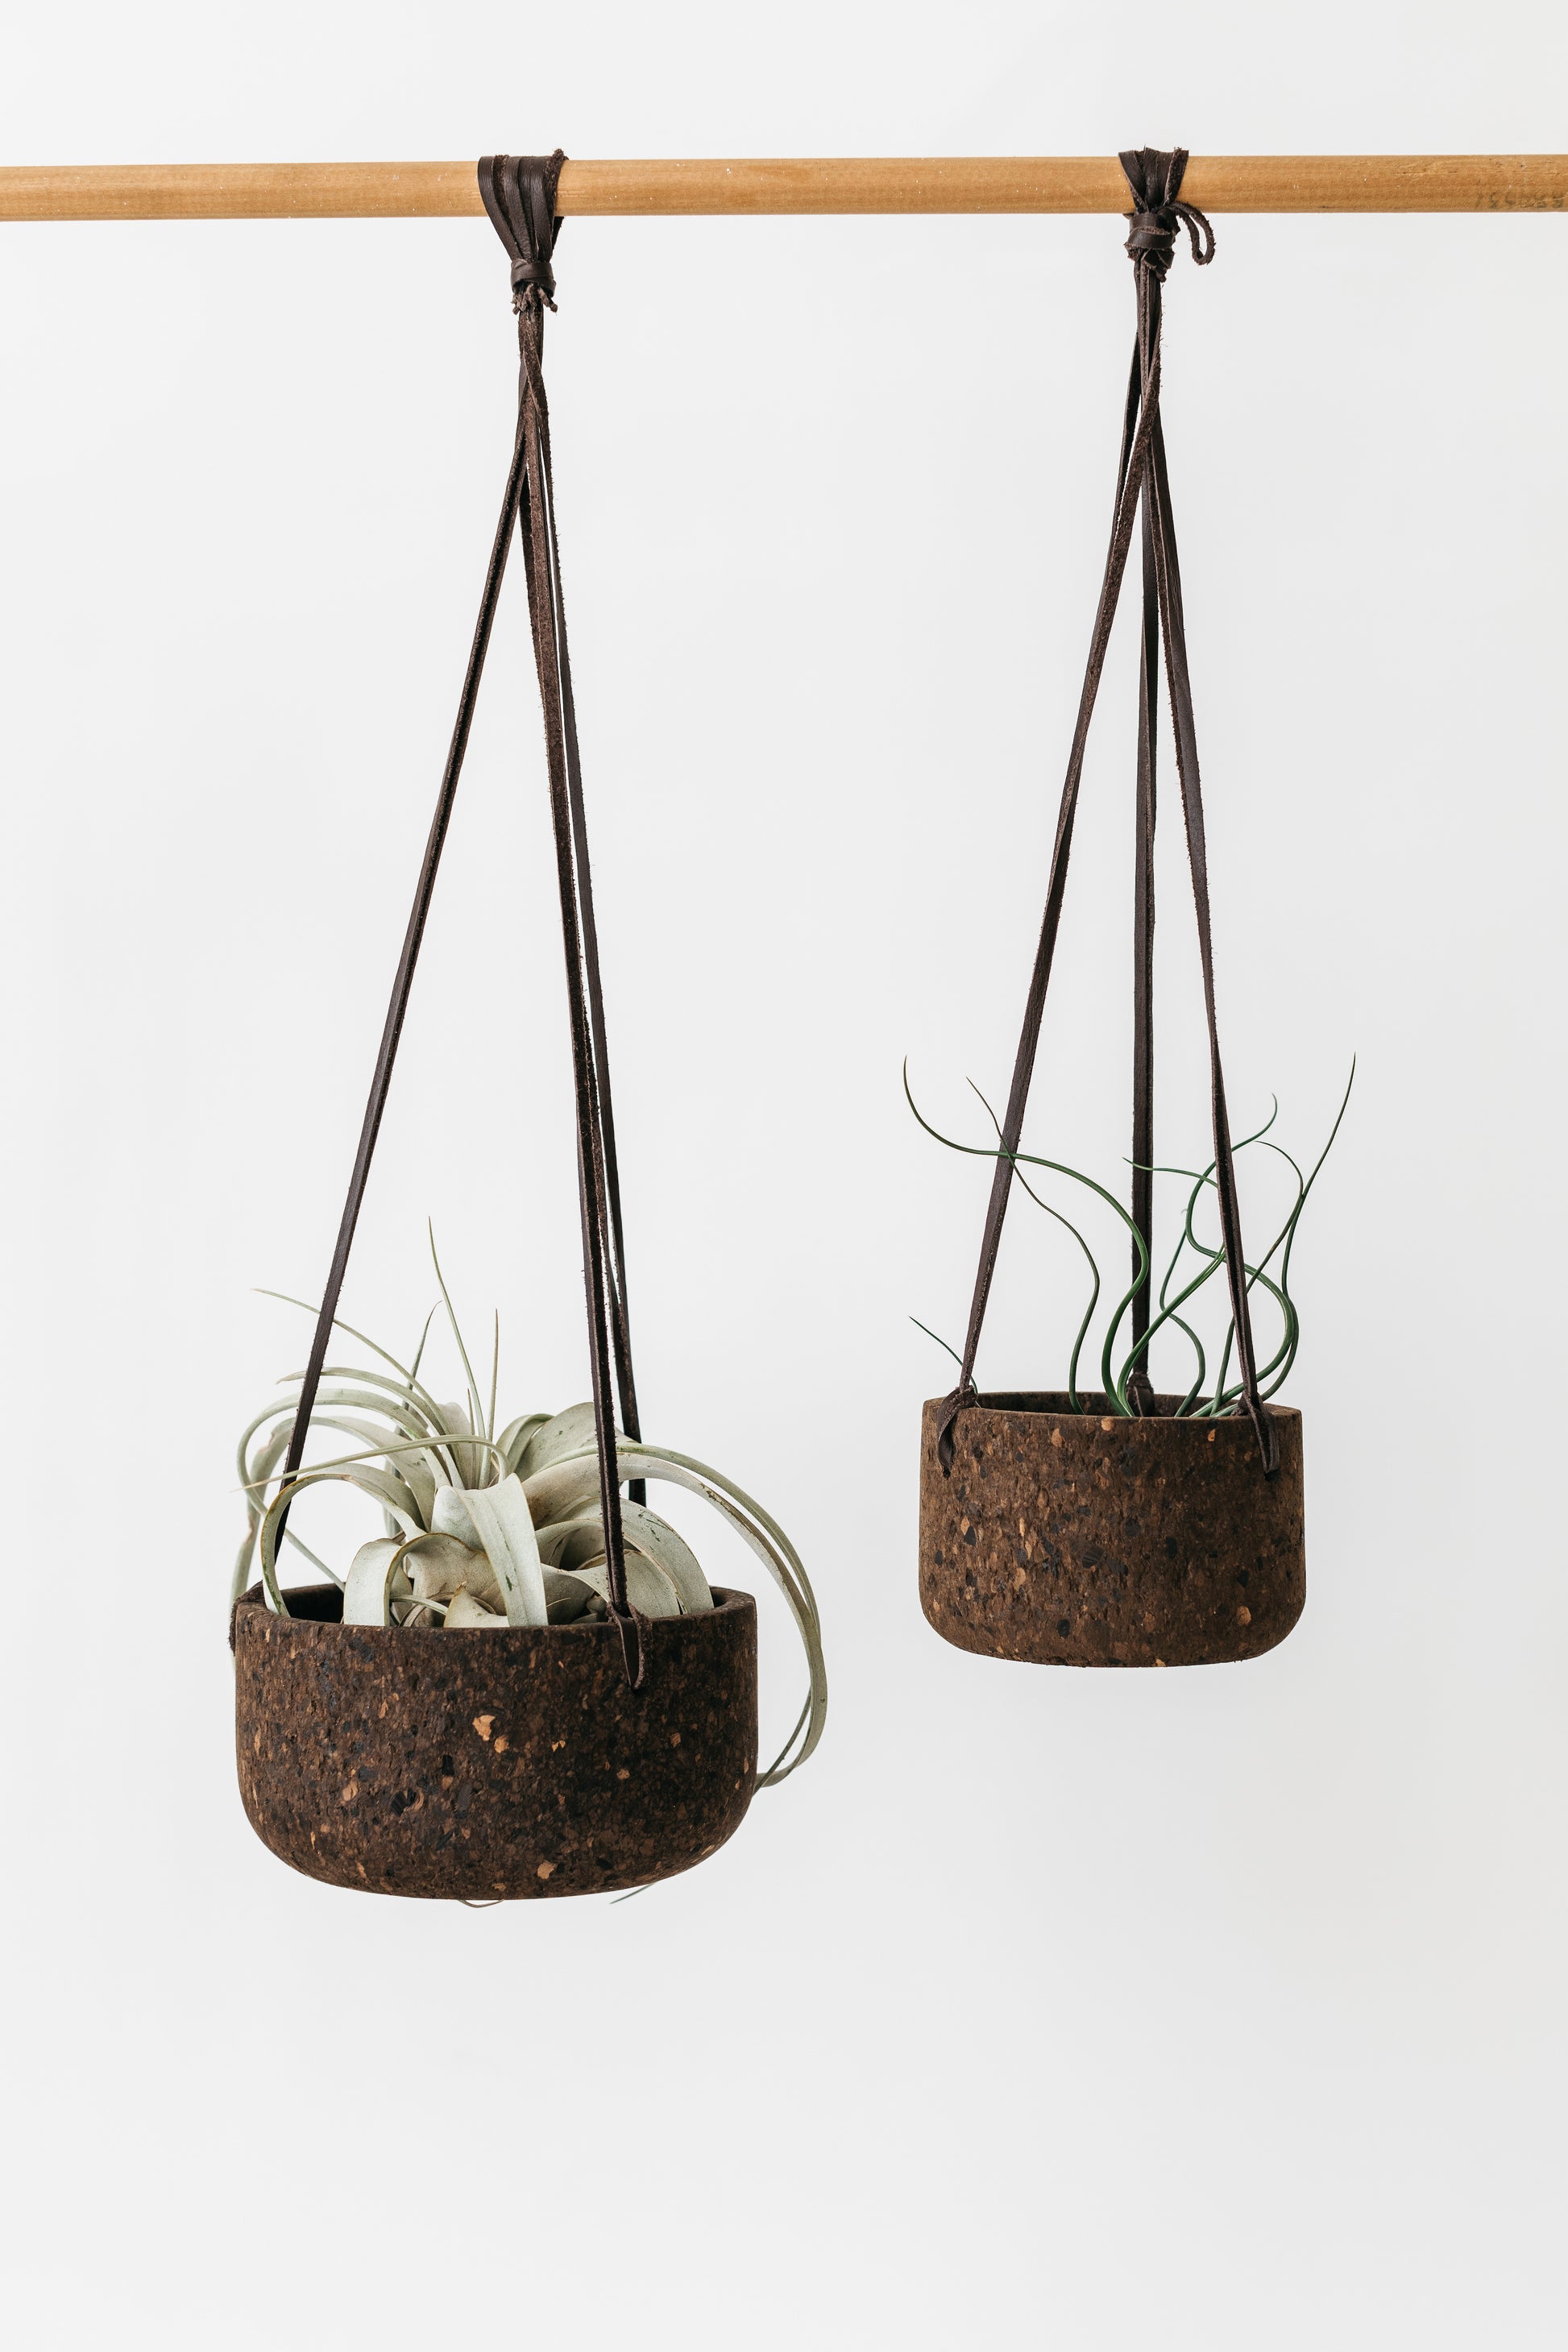 Large and small charcoal cork planters, hanging with air plants. By Melanie Abrantes Designs.